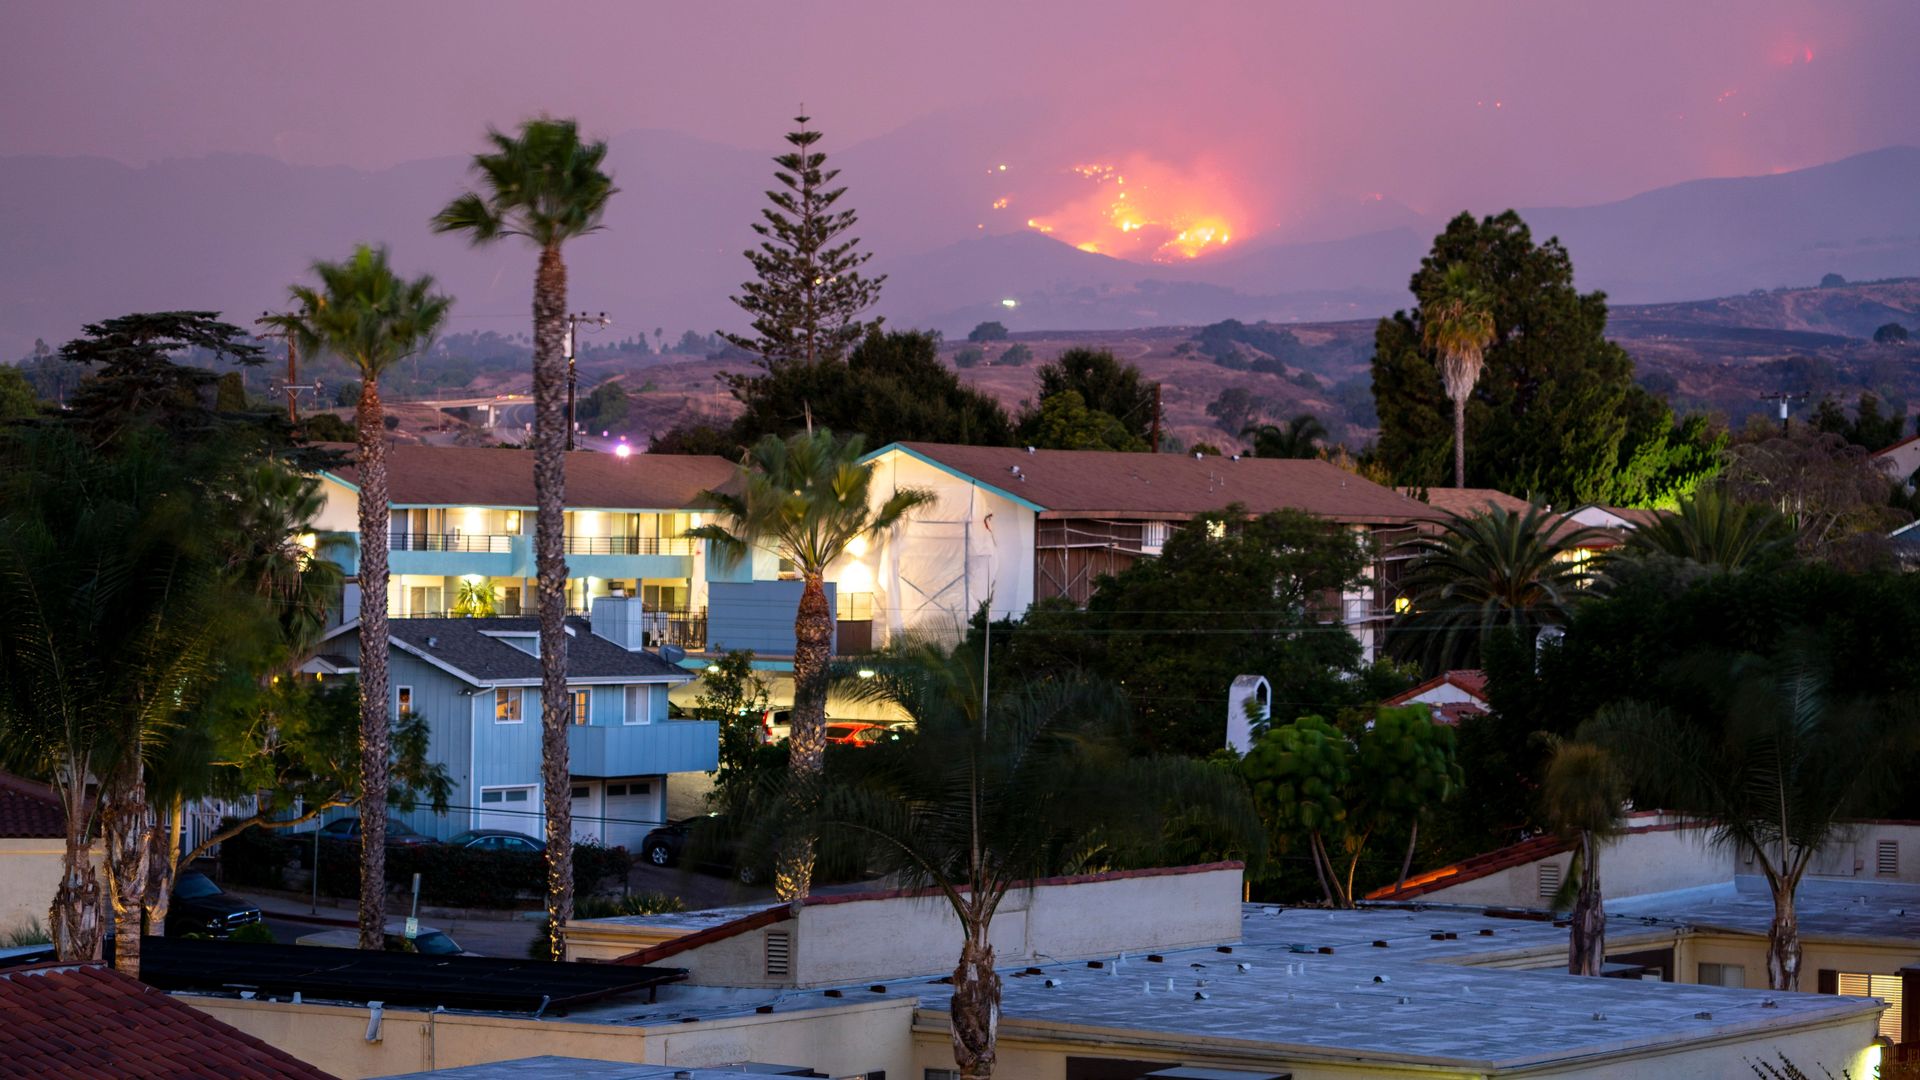 The Cave fire burns a hillside above houses in Santa Barbara